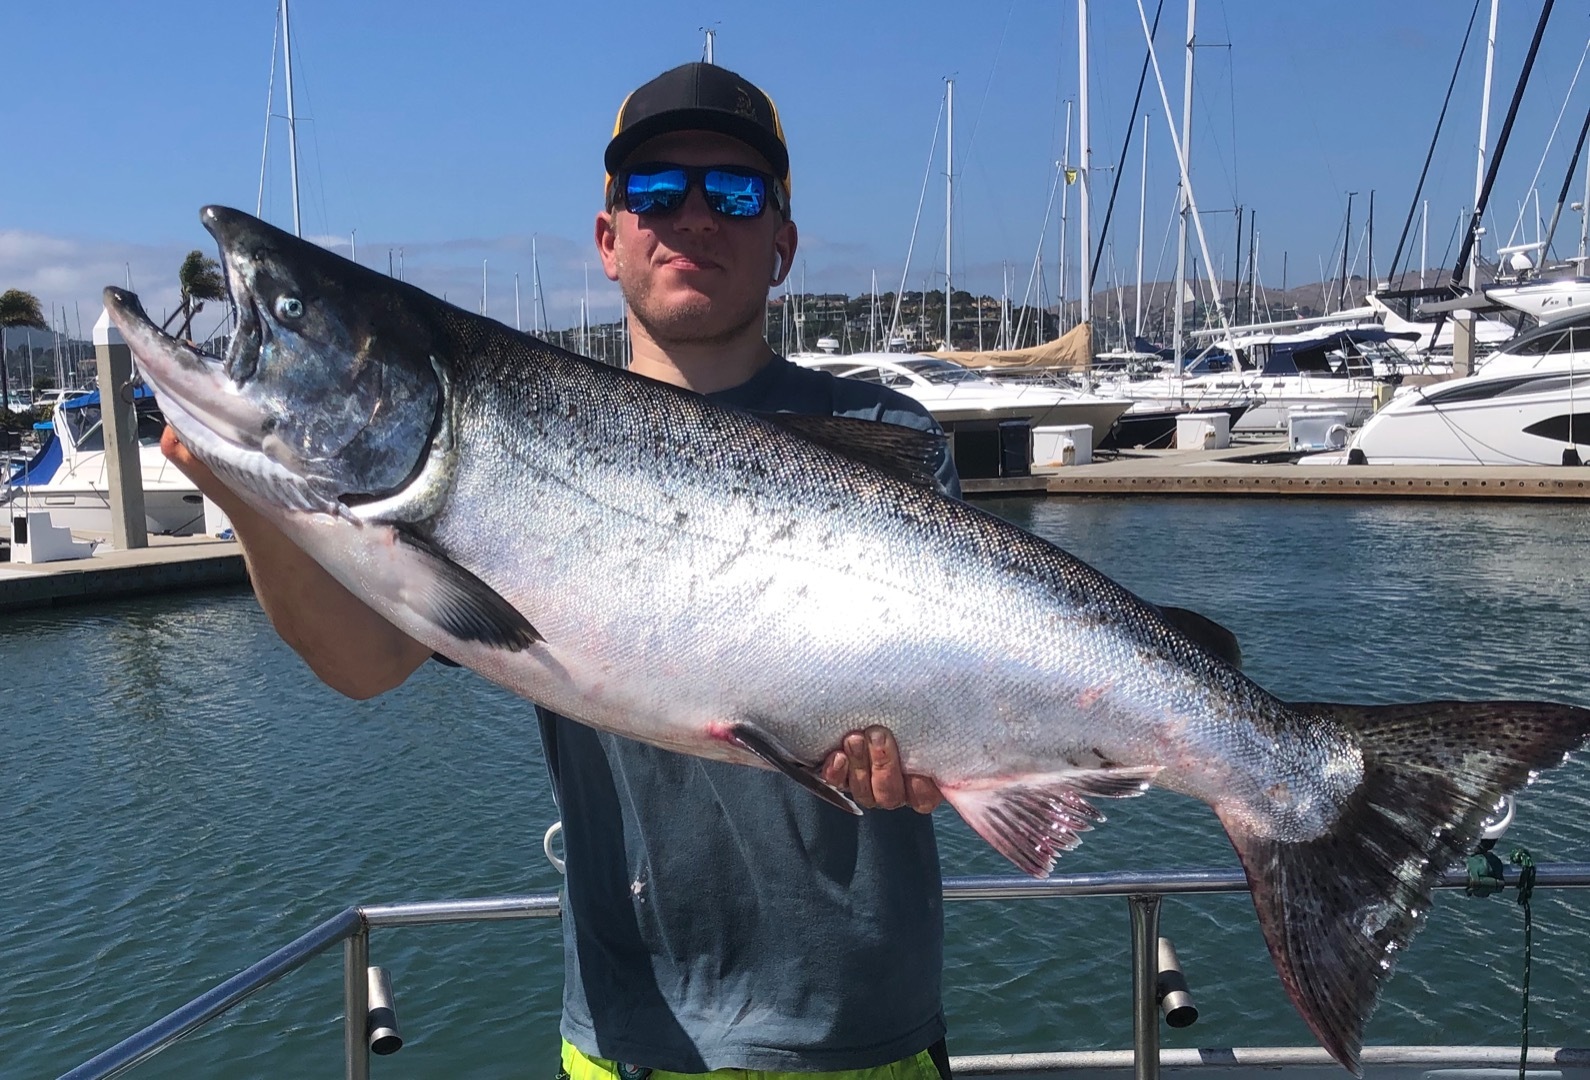 Biggest Salmon of the year so far today !!